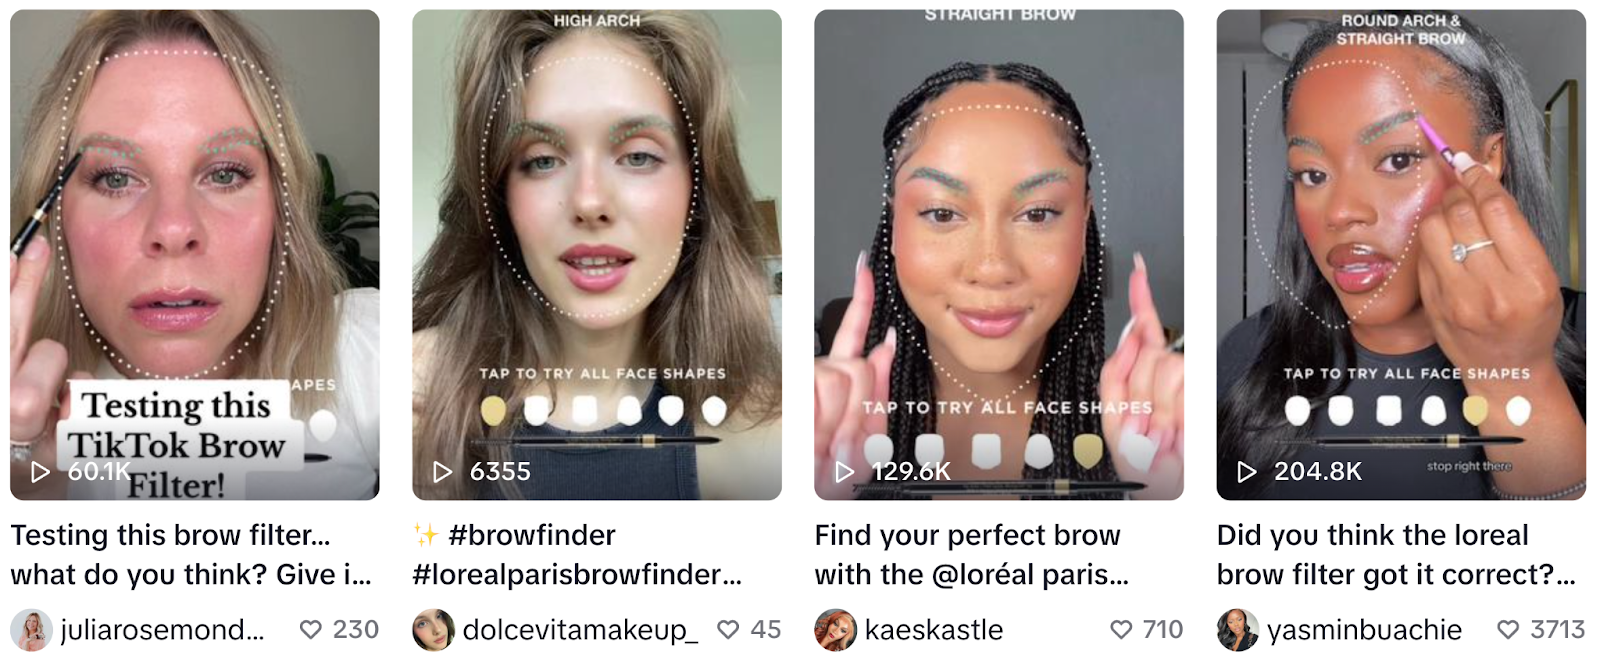 TikTok users create their own videos using the L’Oreal Paris Brow Finder AR filter.